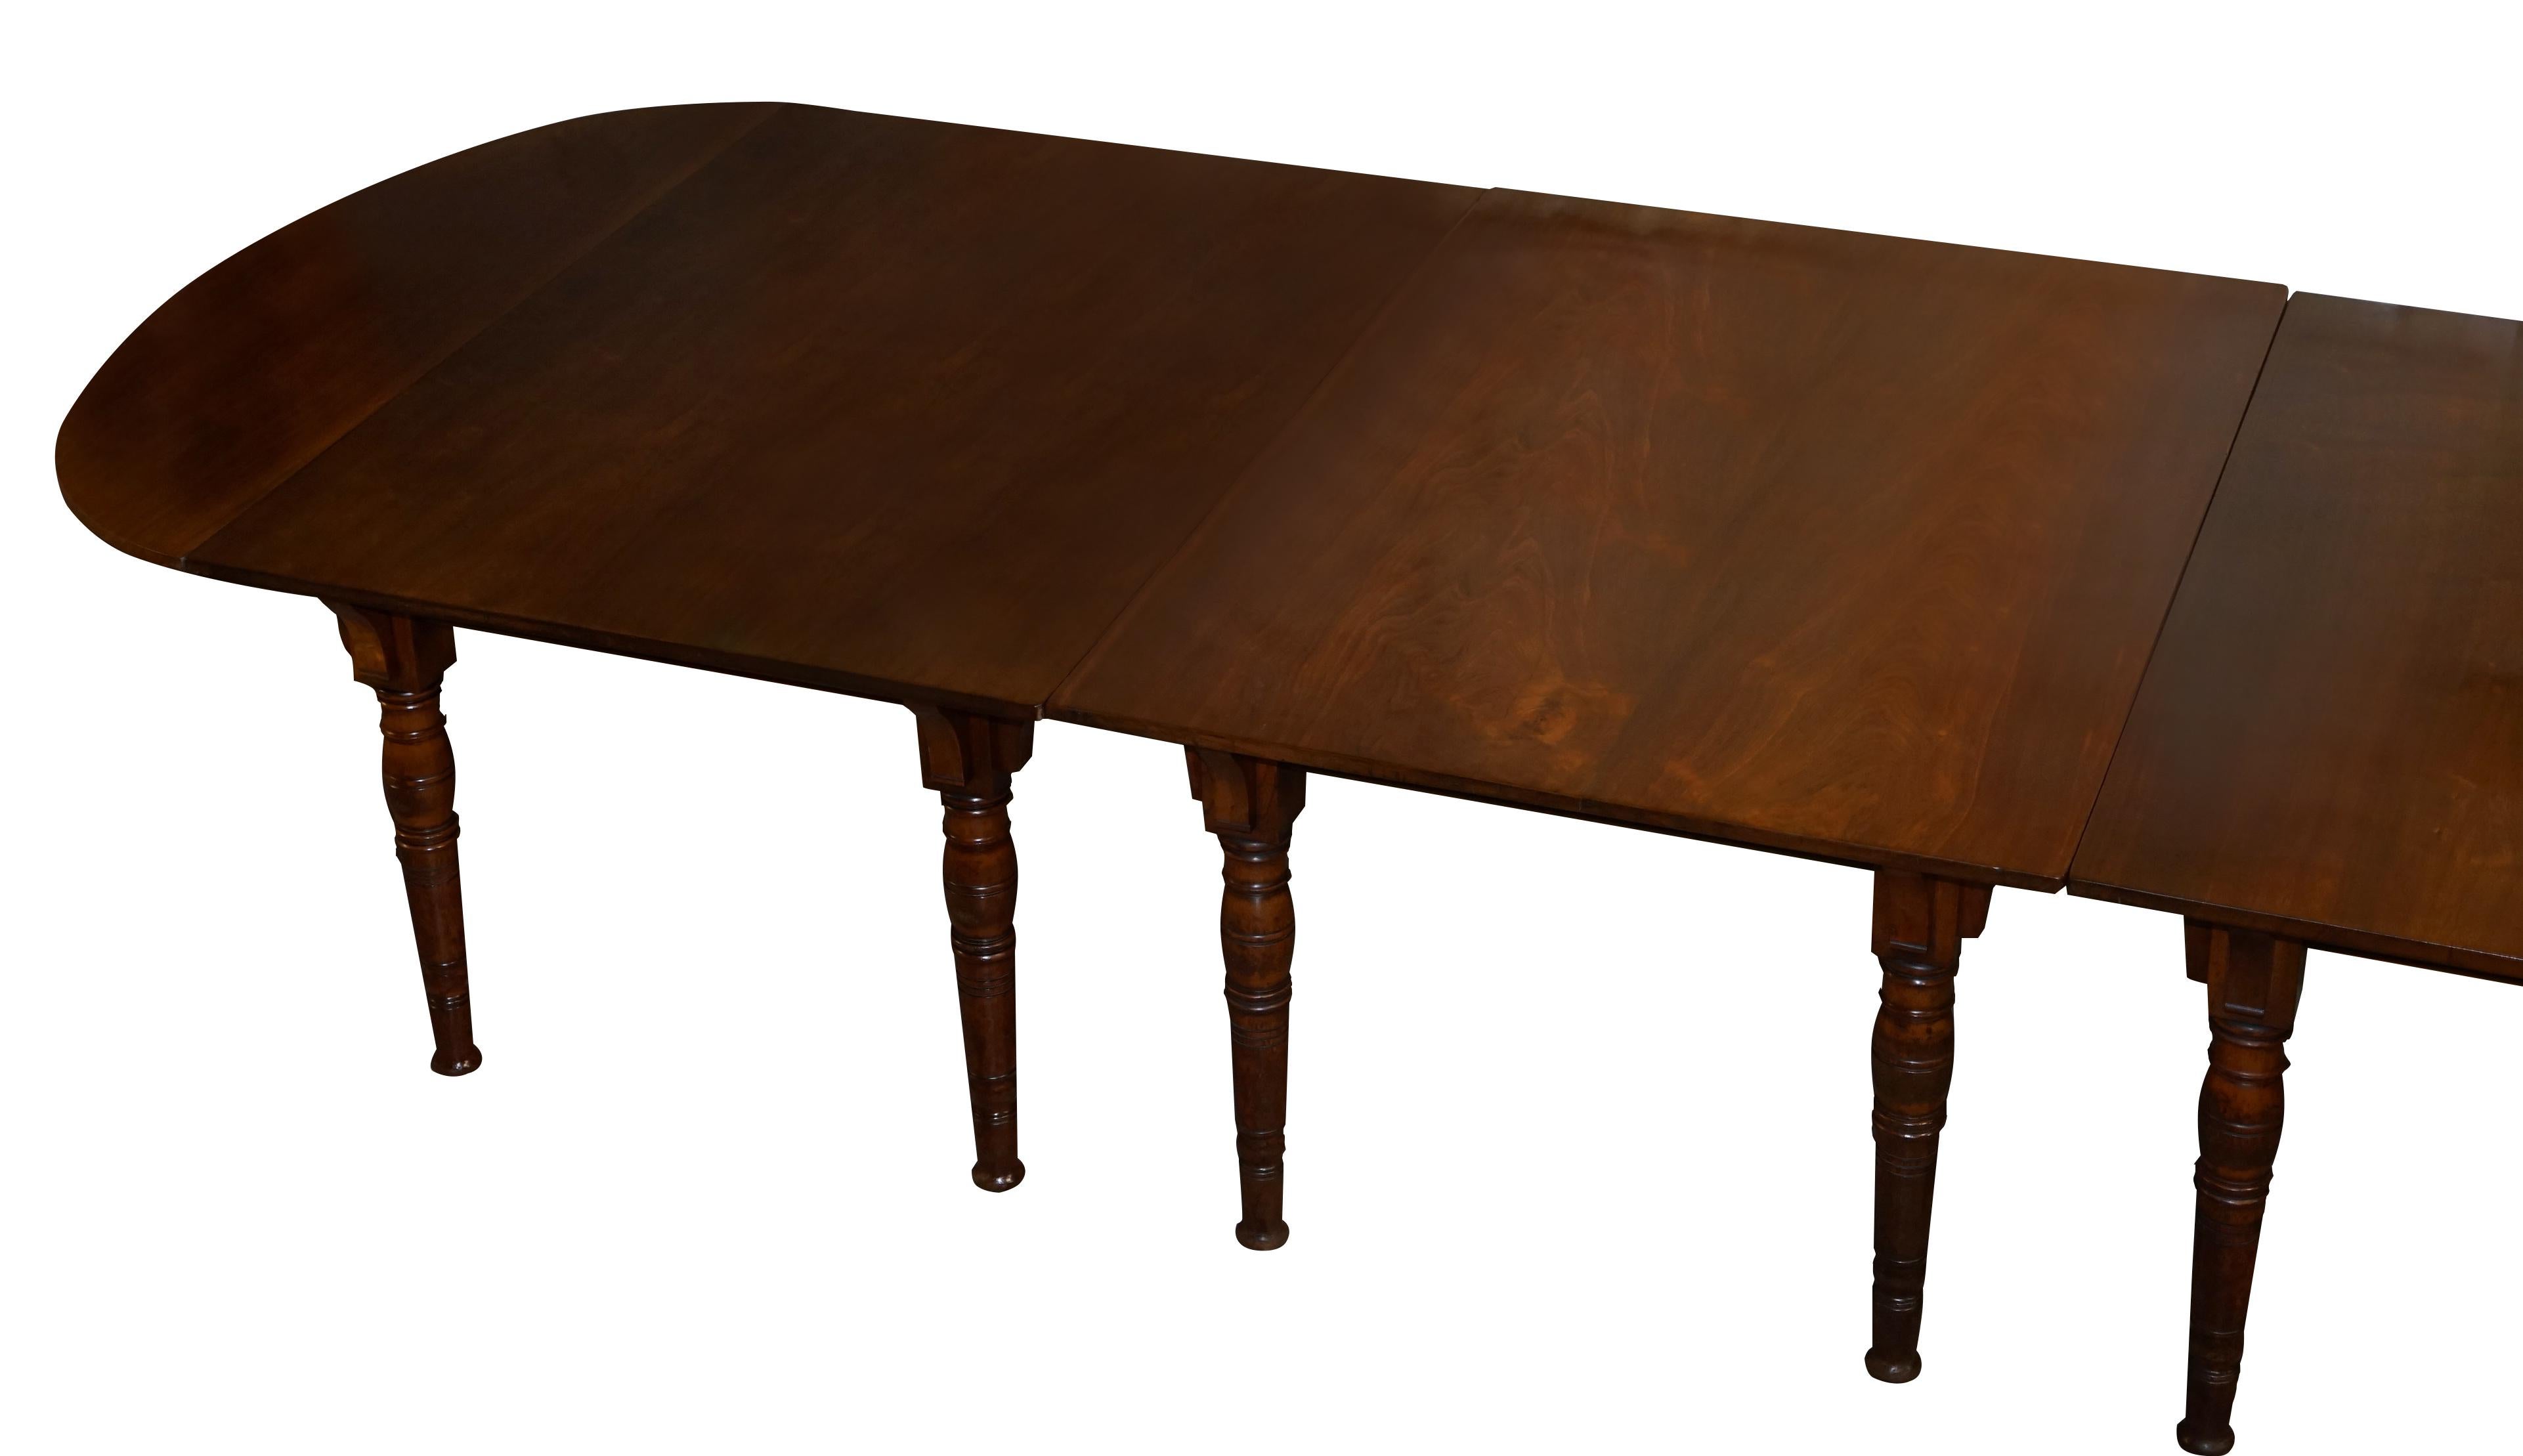 Rare Gillows Lancaster 1789-1795 George III American Walnut Dining Table For Sale 2